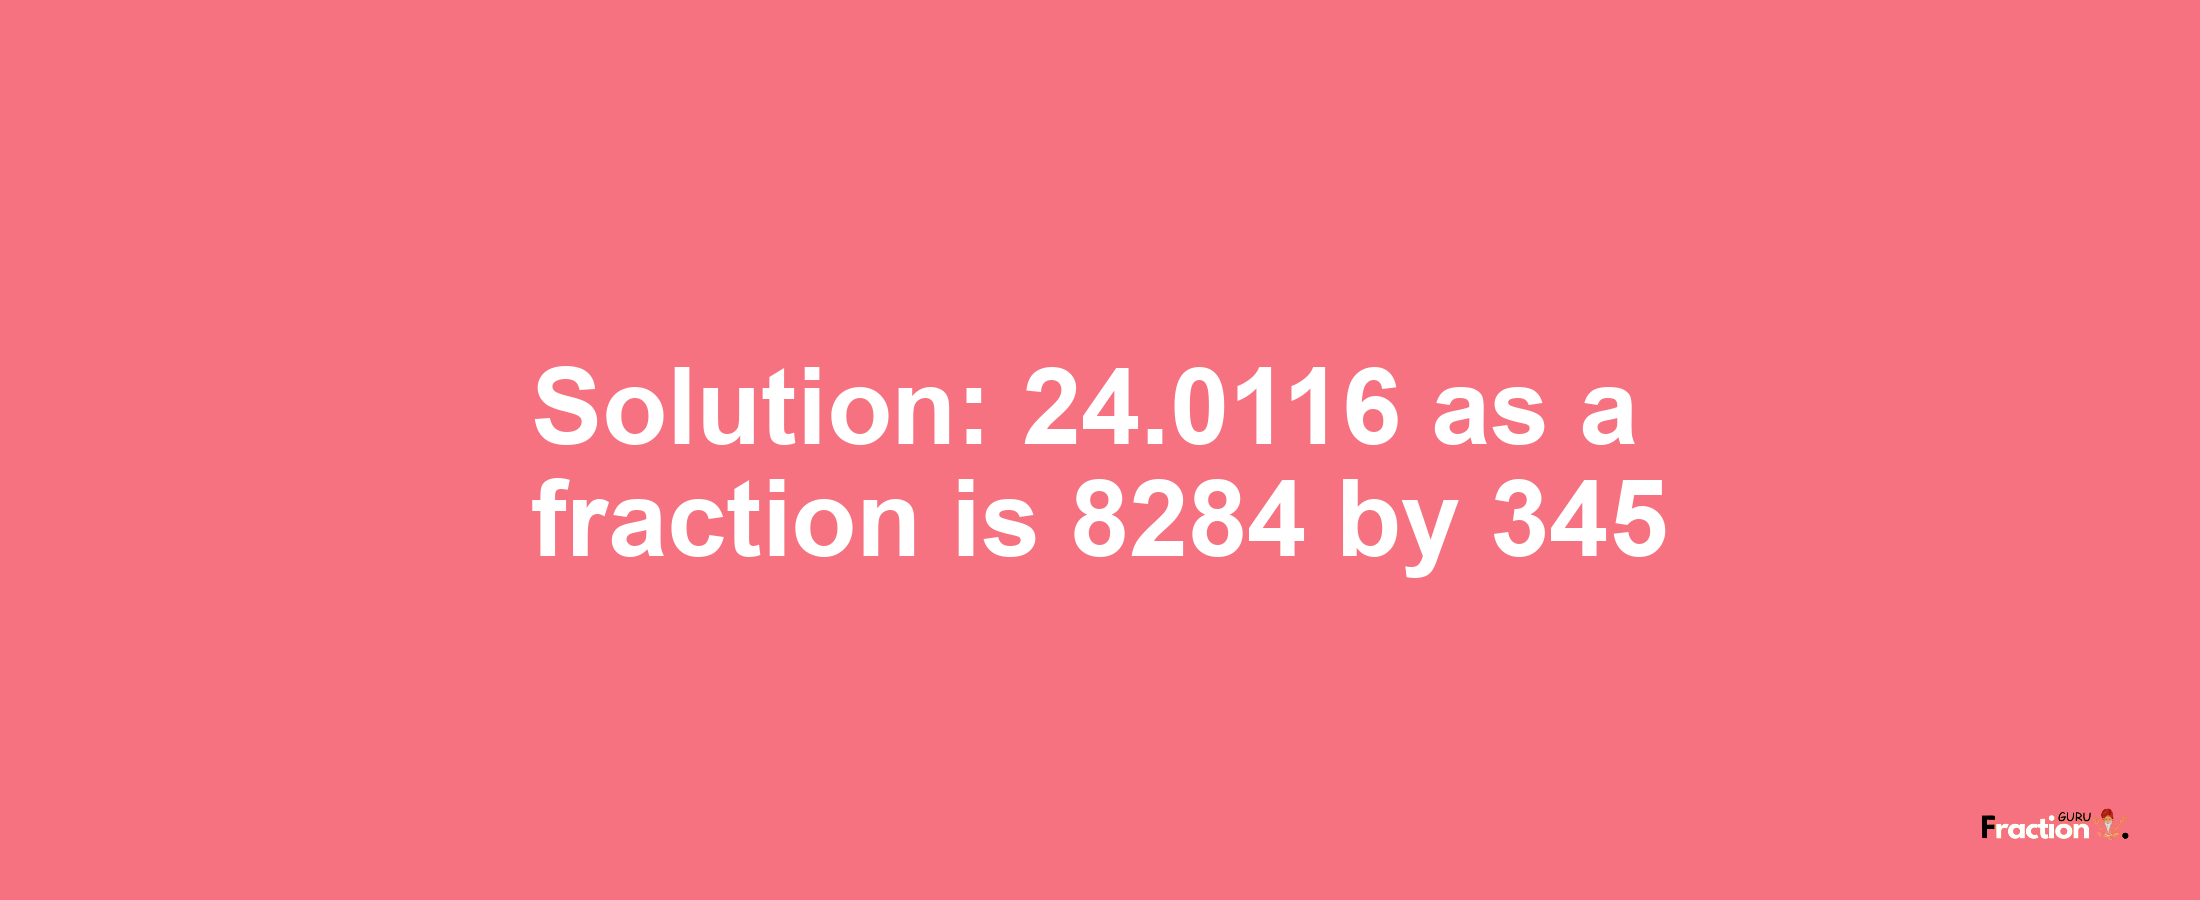 Solution:24.0116 as a fraction is 8284/345